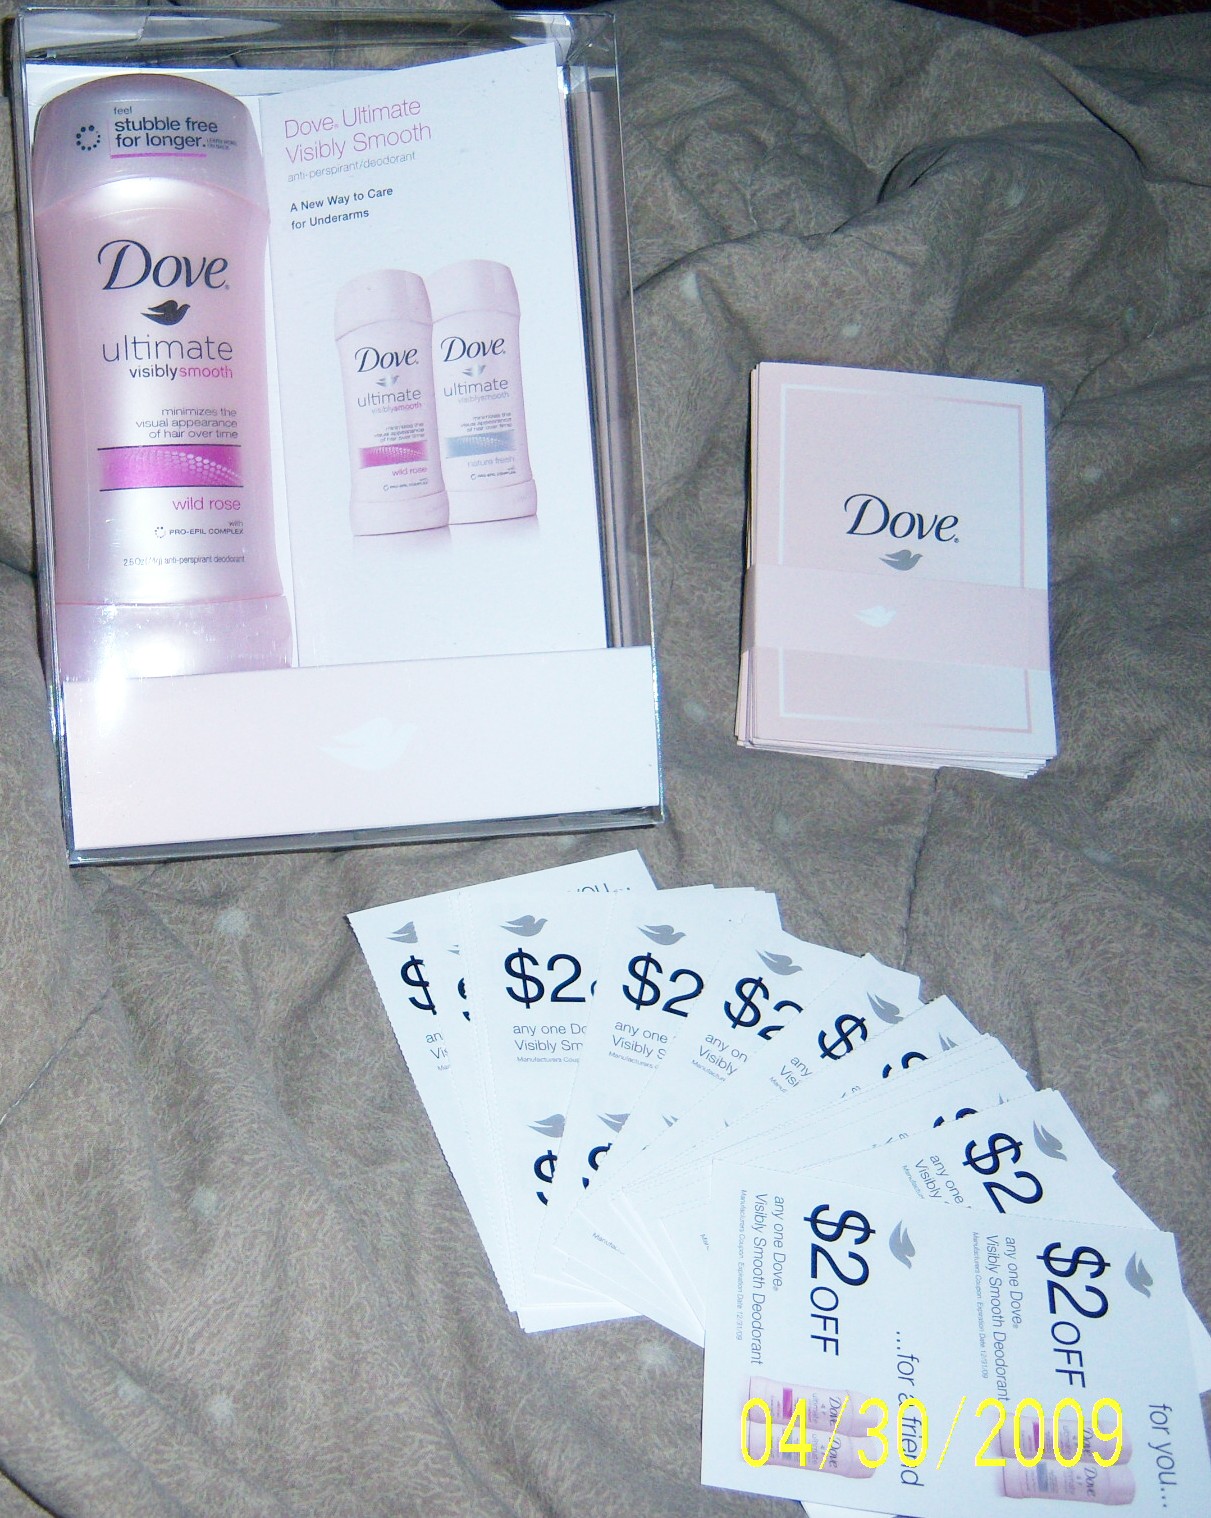 Dove Ultimate Visibly smooth deodorant, coupons, and brochures